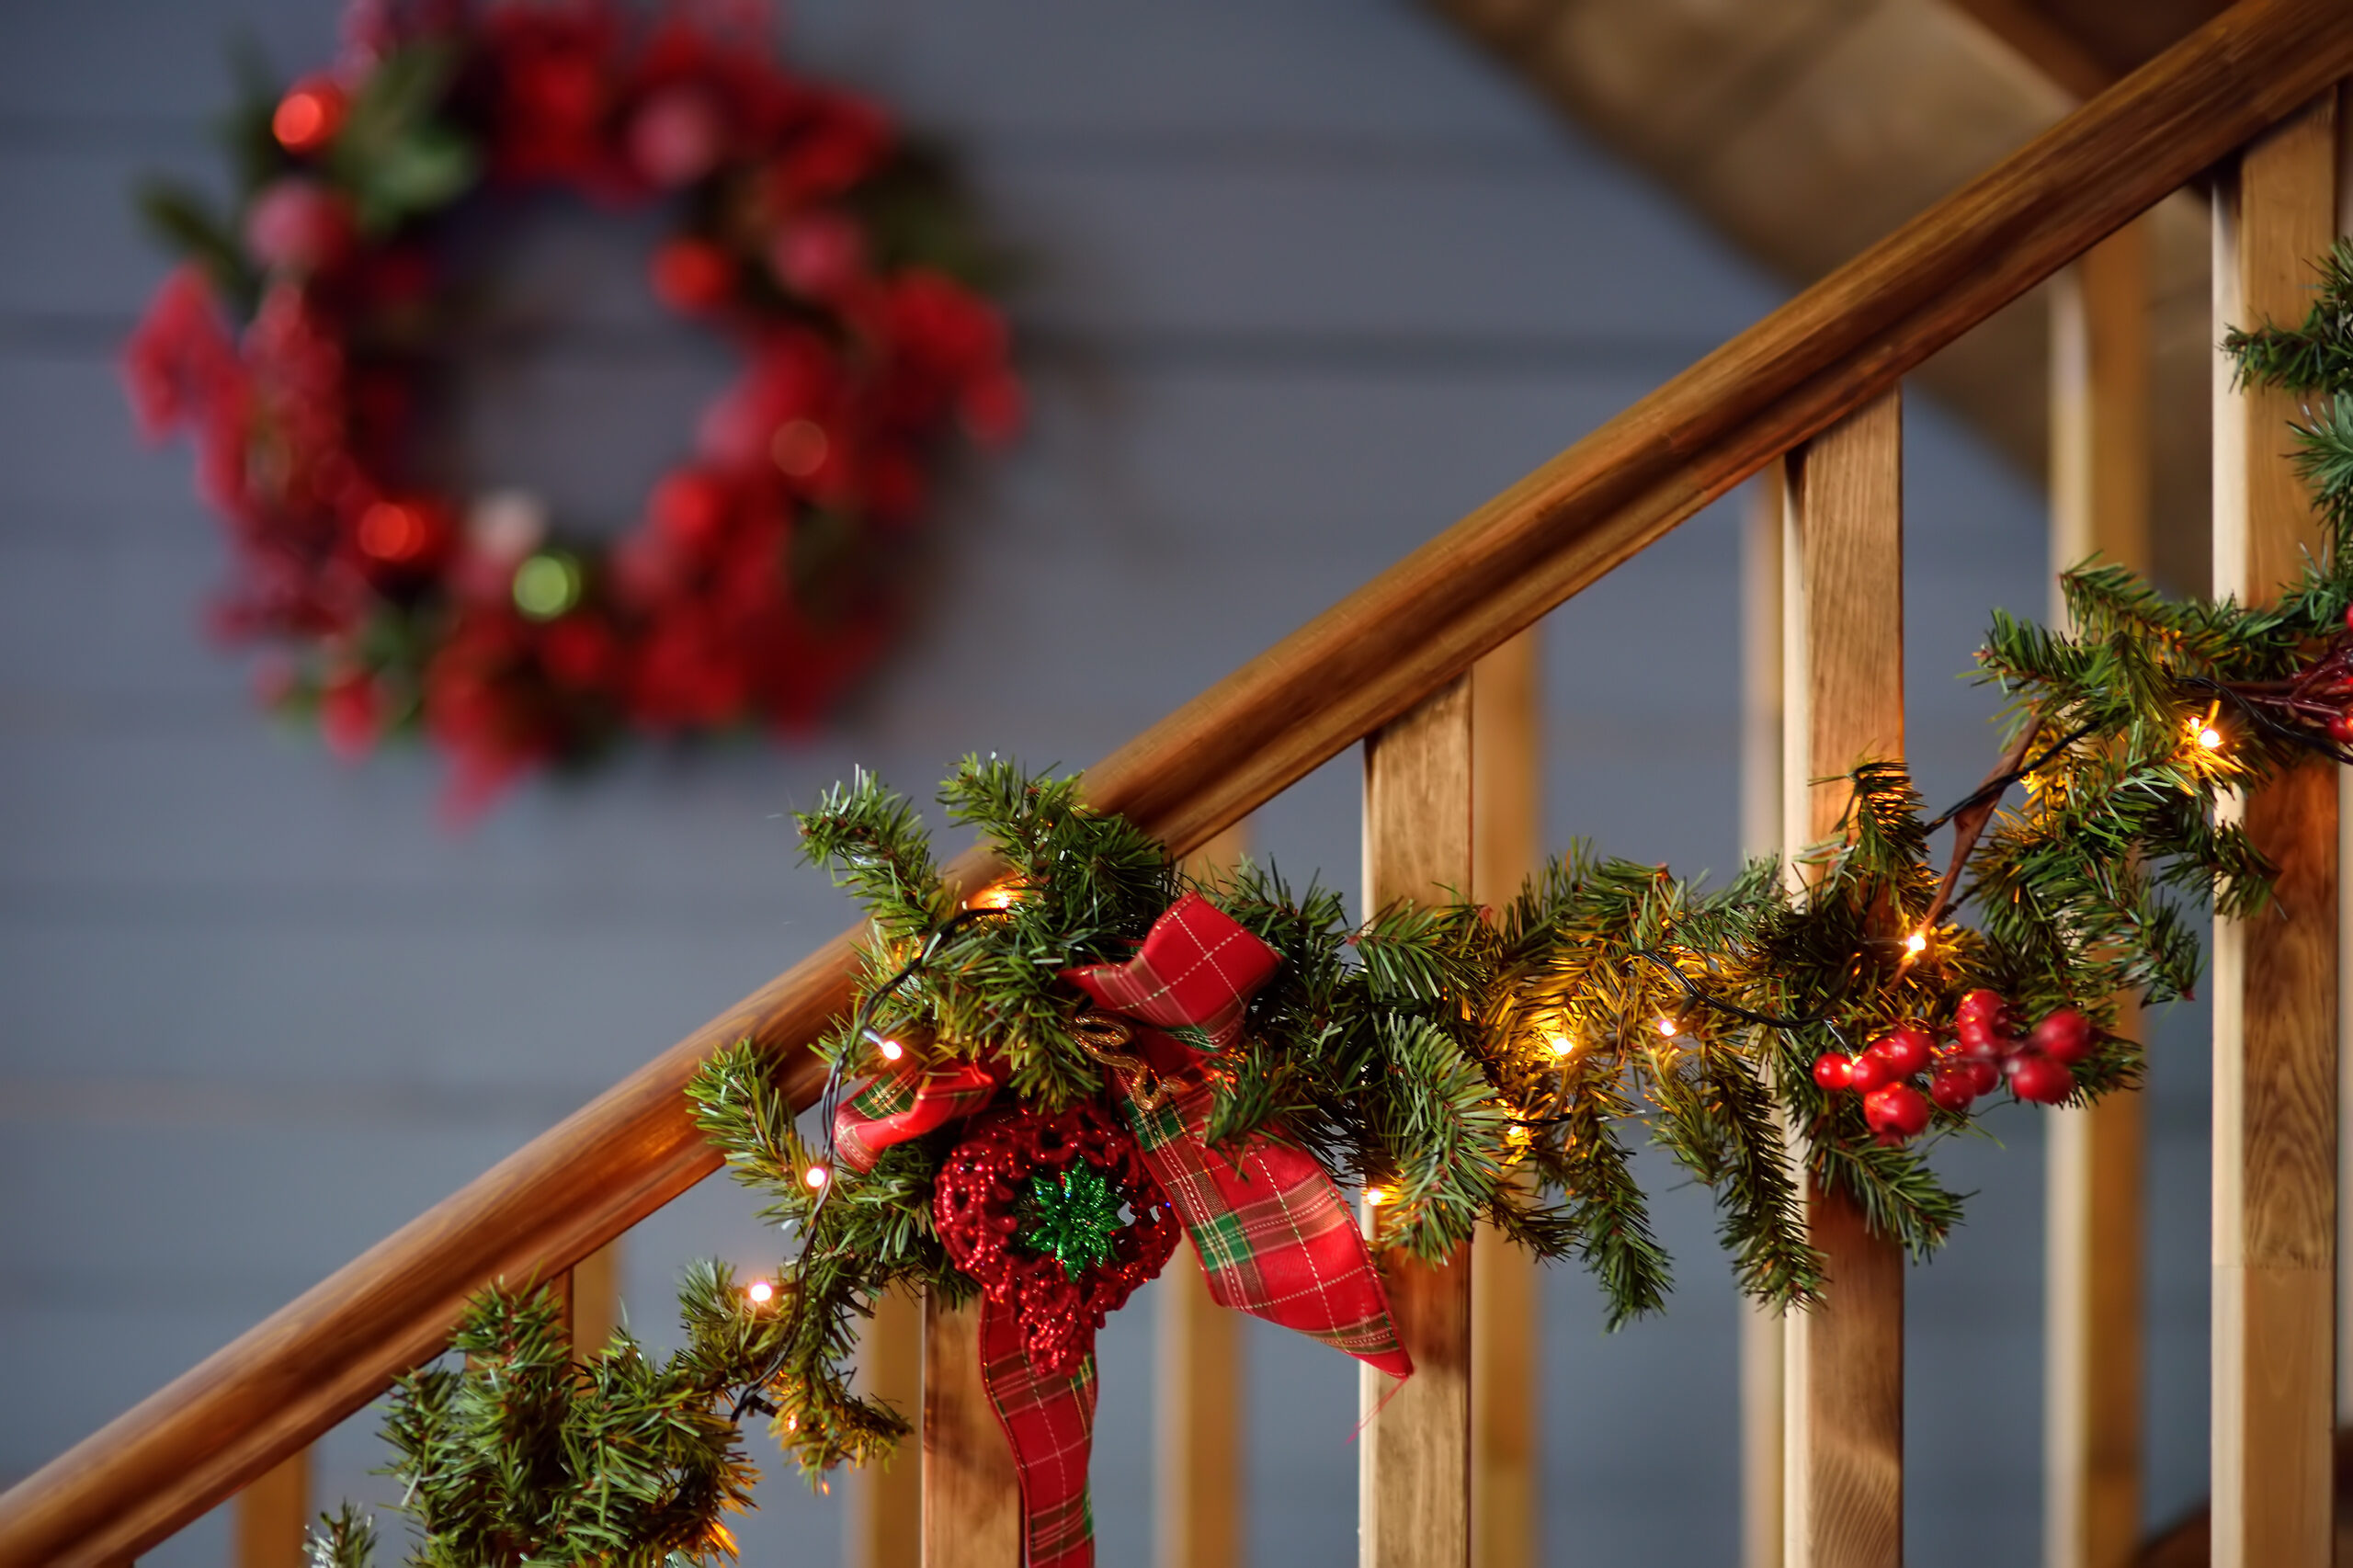 A warmly lit cedar garland adorned with red ribbons and festive ornaments winding down a wooden staircase railing.